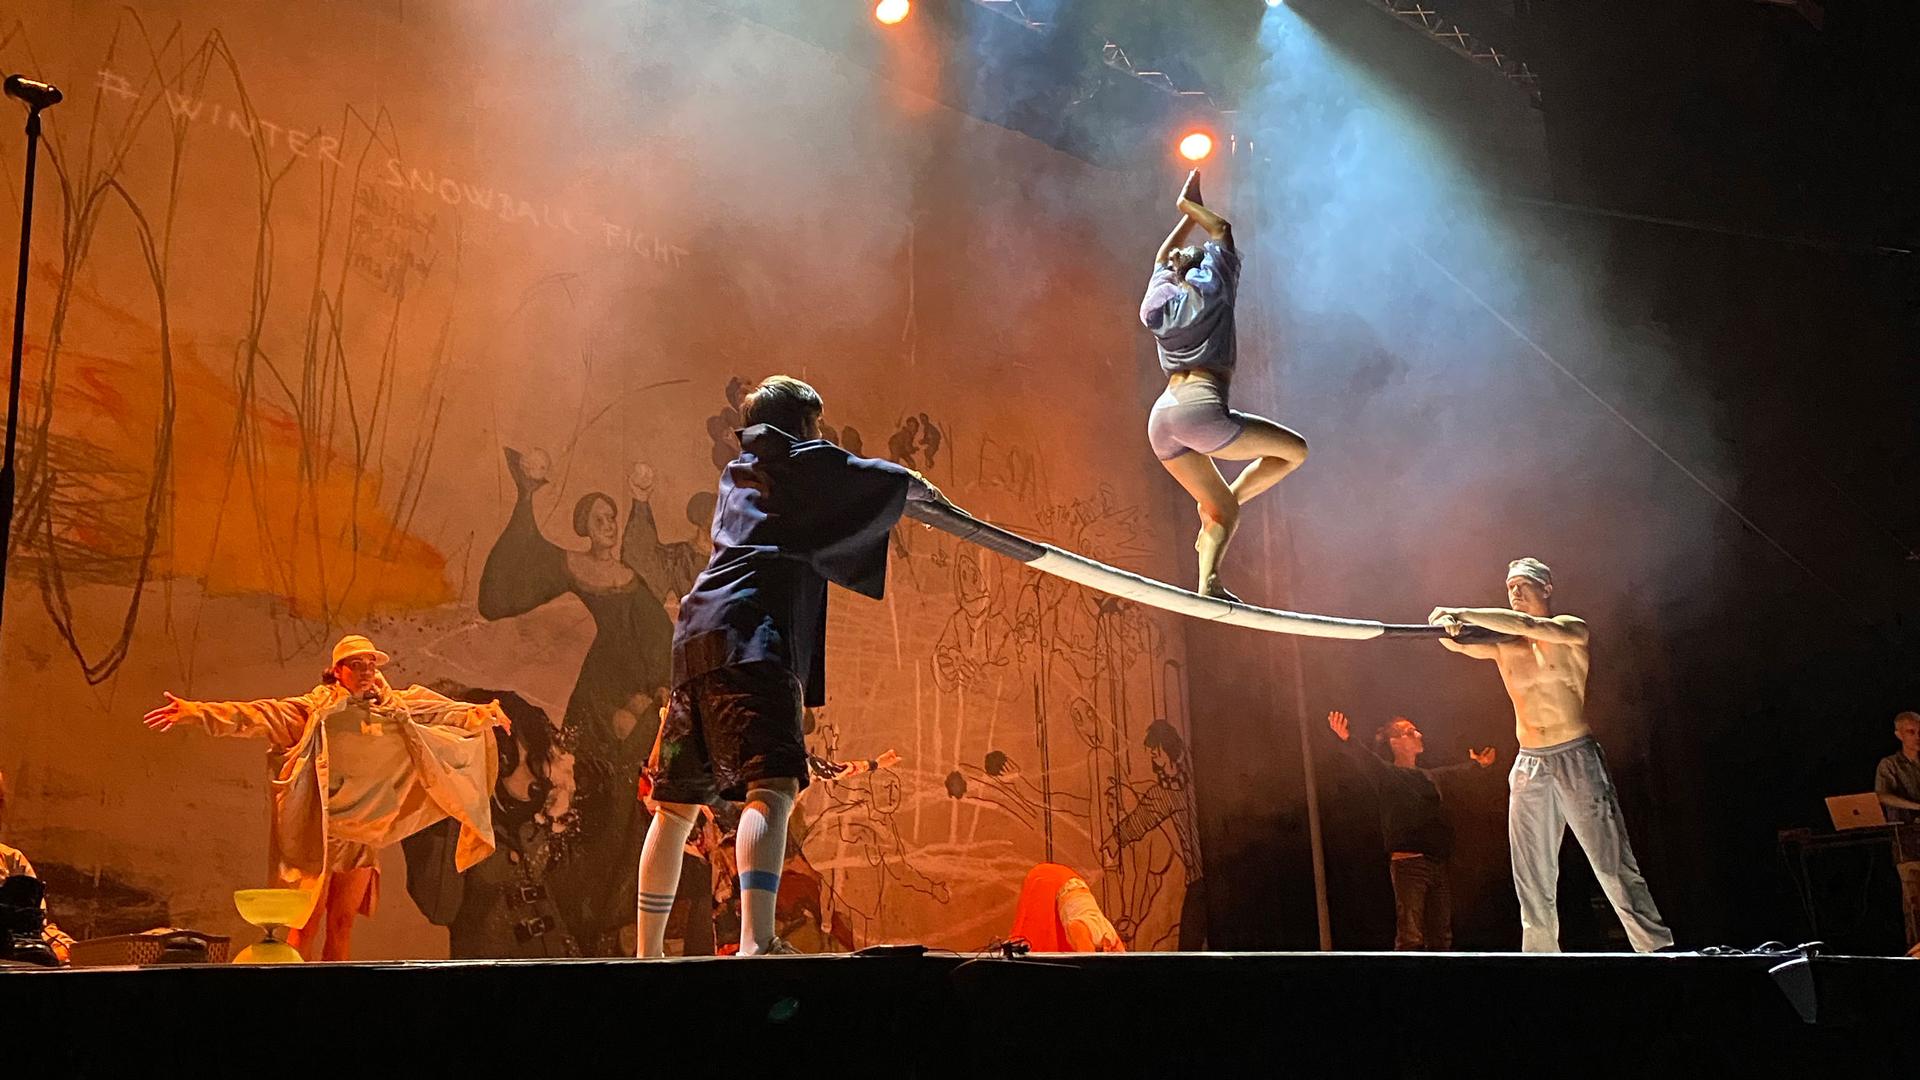 Some Ukrainian students were evacuated from Ukraine thanks to a Czech circus company, Cirk La Putyka. “Boom," a performance they took to Edinburgh, was rewritten to reflect the students’ perspectives of war and displacement.